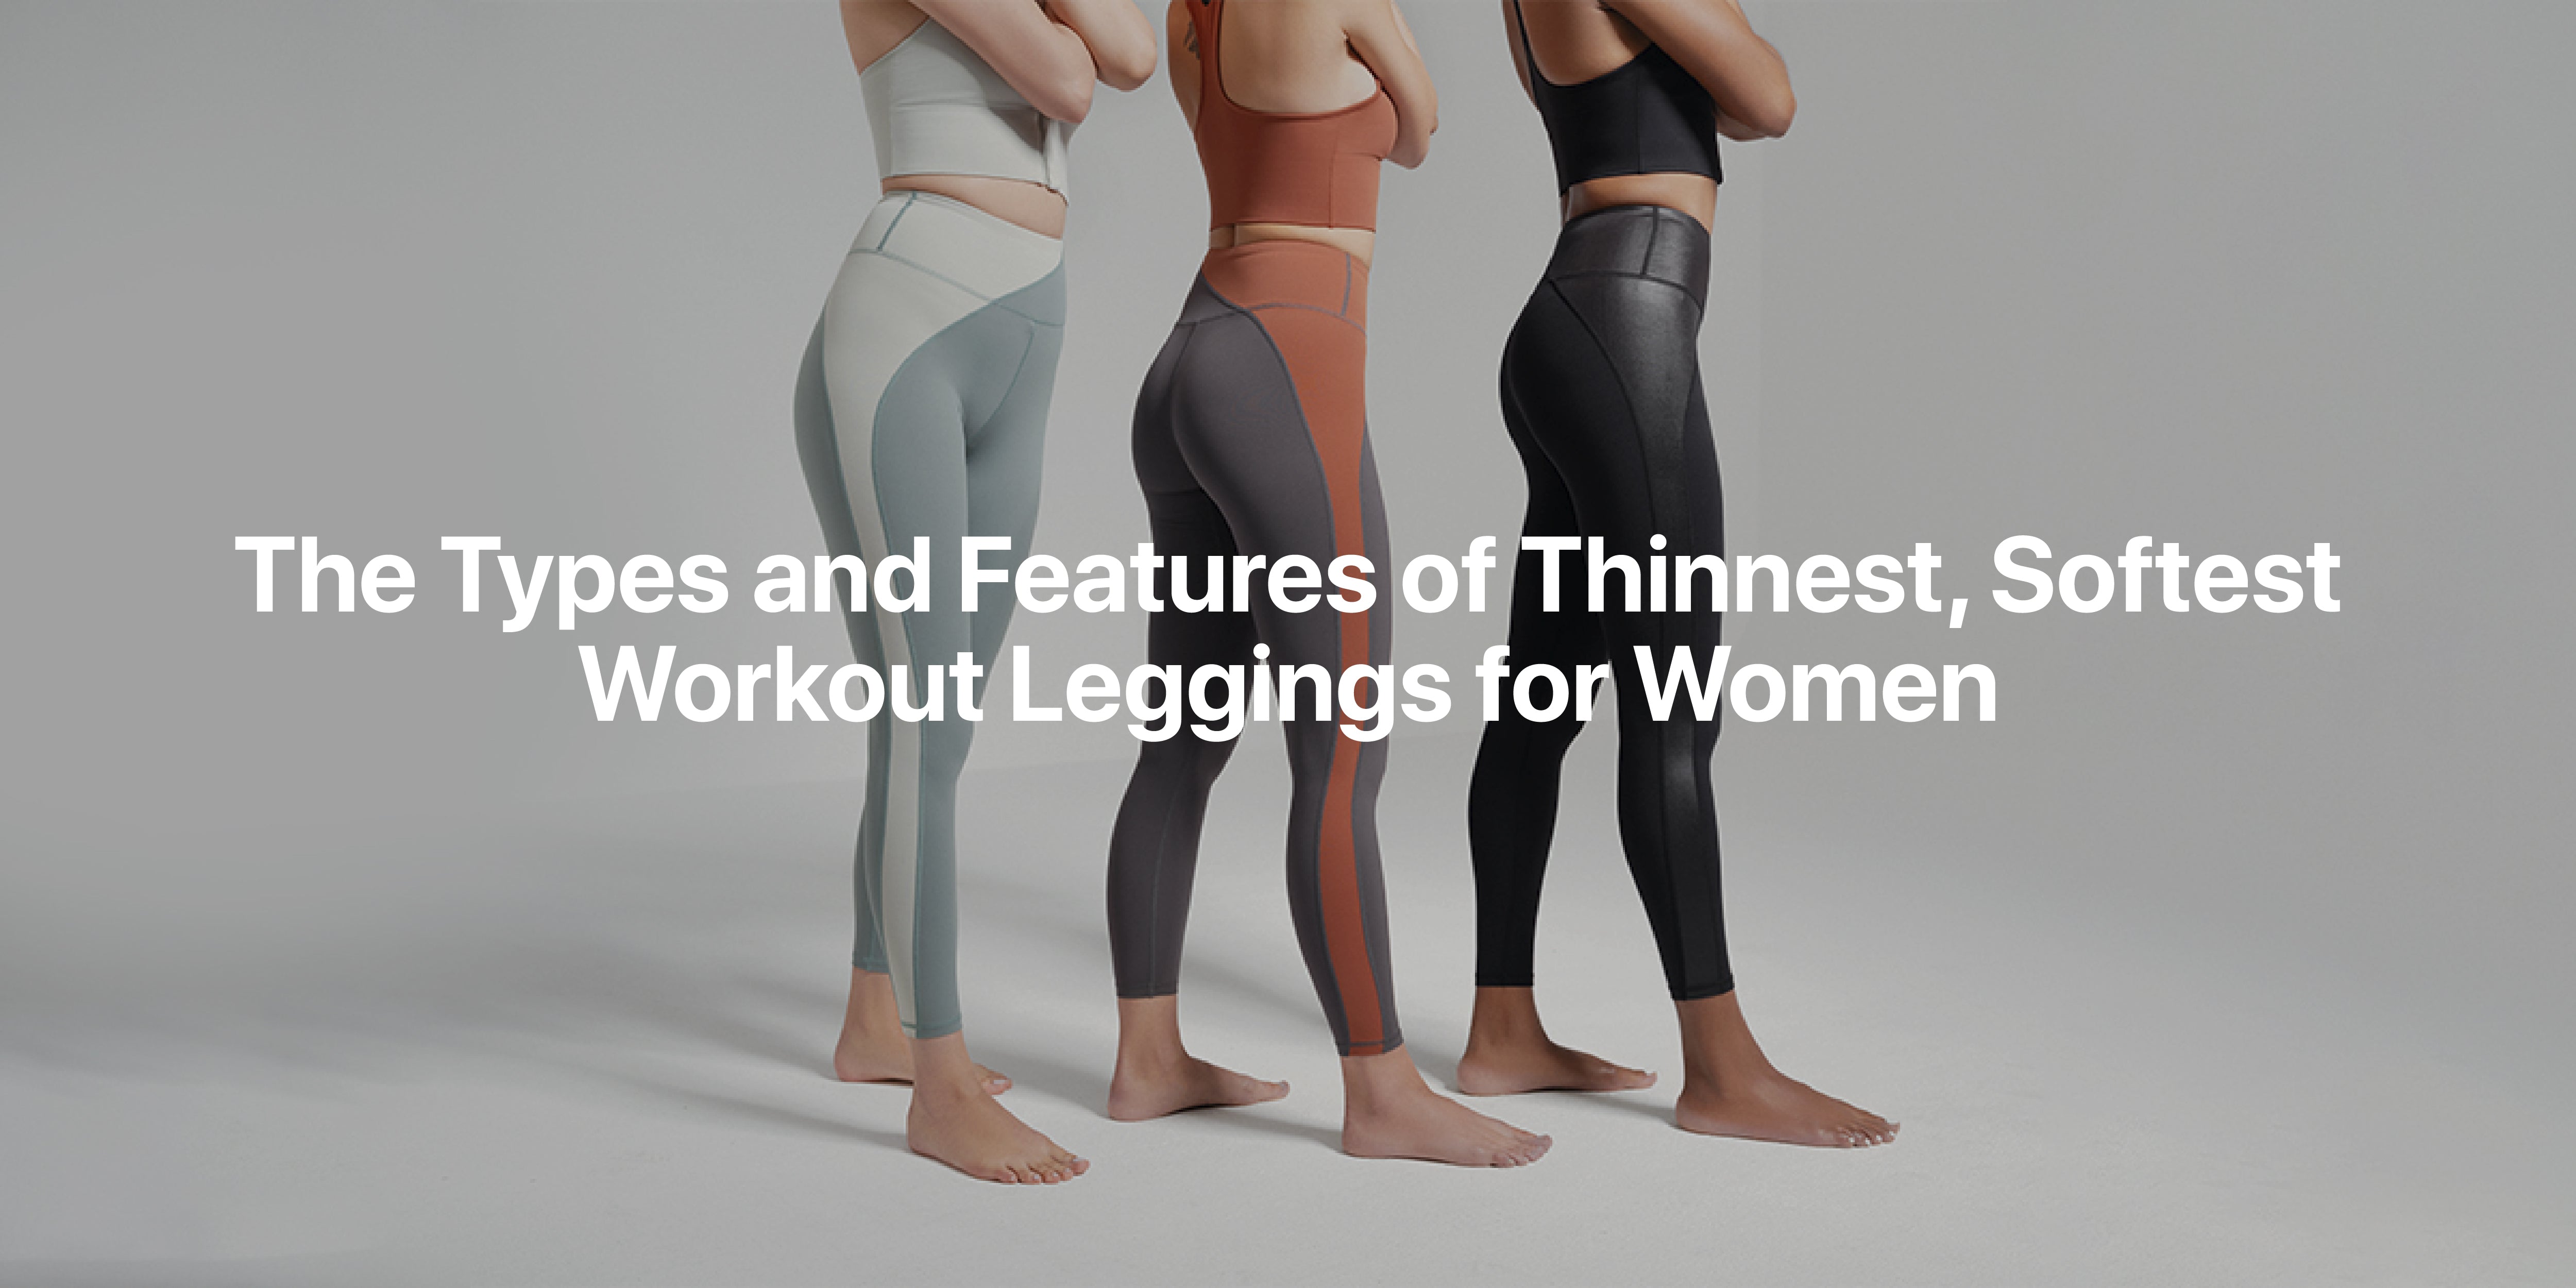 The Types and Features of Thinnest, Softest Workout Leggings for Women